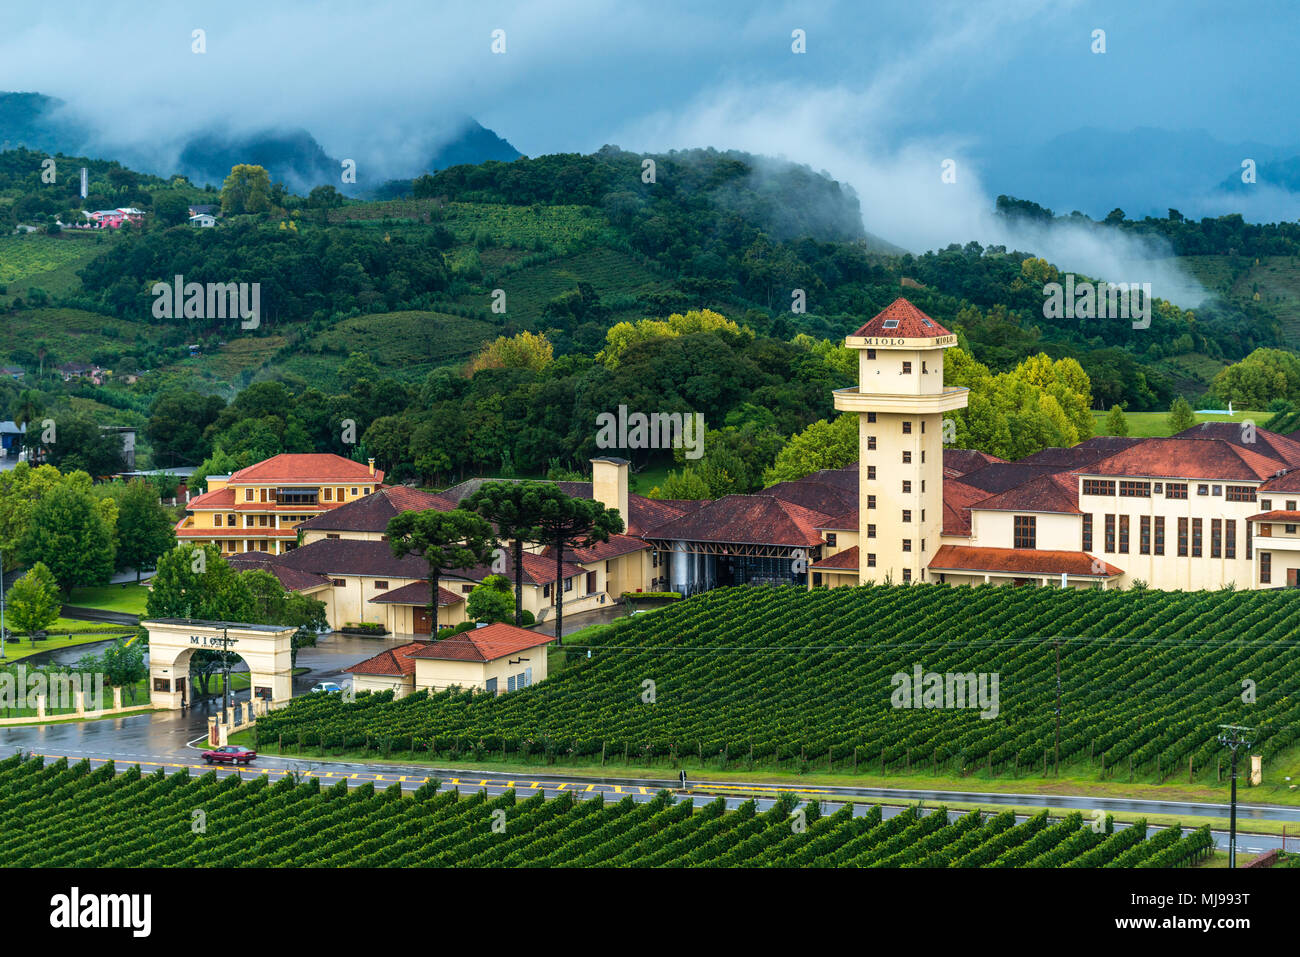 Winery "Miolo" sourrounded by vinyards, Vale dos Vinhedos, Rio Grande do Sul, Brazil, Latin America Stock Photo